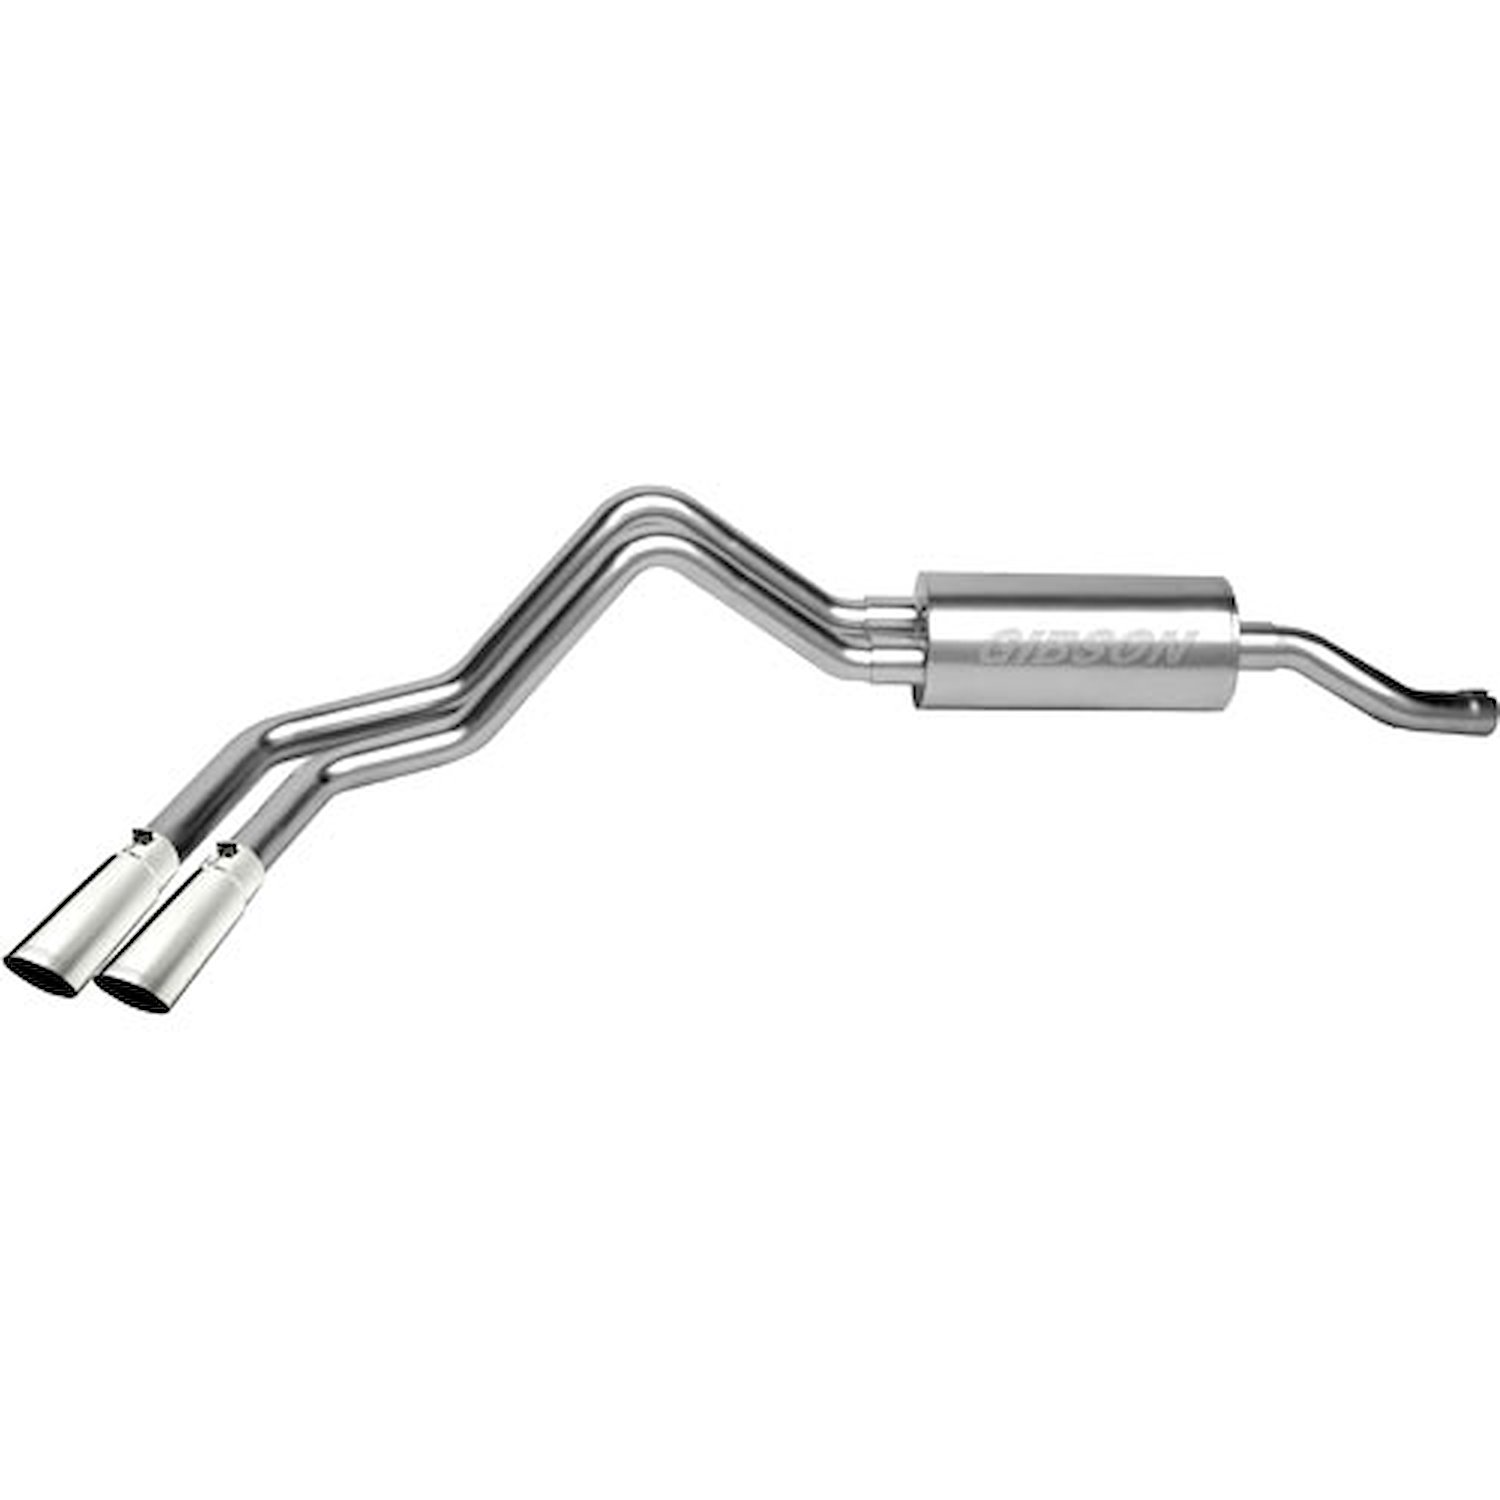 Dual Sport Cat-Back Exhaust 87-96 Ford F150/250/350 Truck